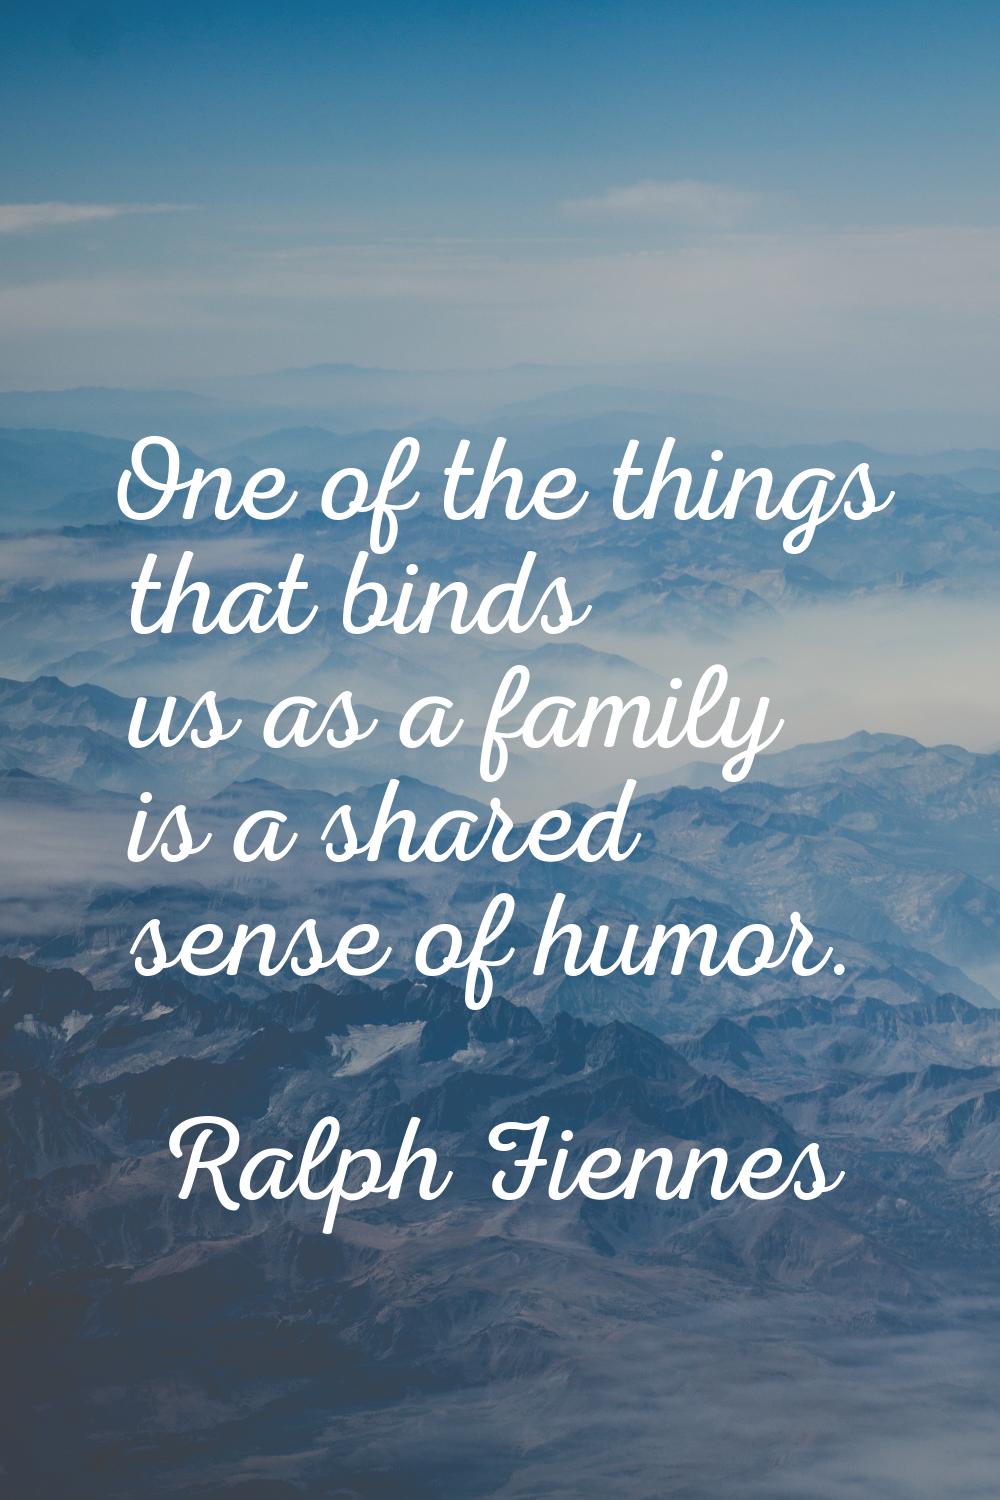 One of the things that binds us as a family is a shared sense of humor.